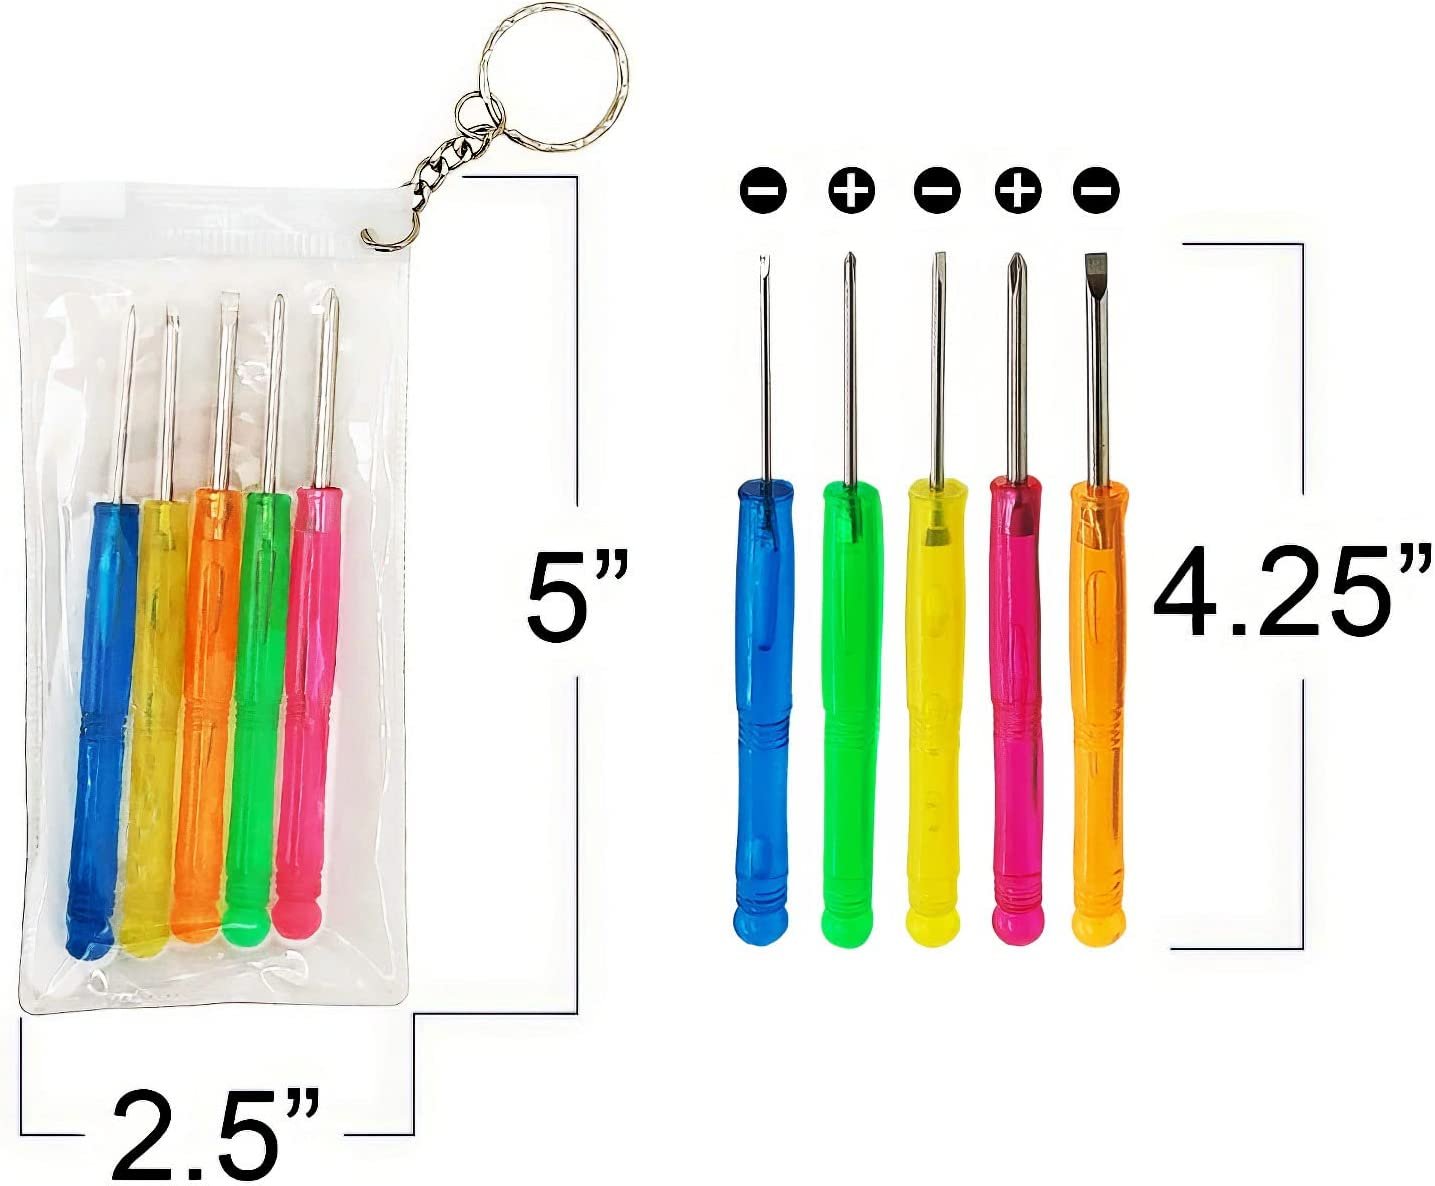 12 Pieces 1.5 Inch Tape Measure Keychains Functional Mini Tape Measures  with Stable Slide Lock Birthday Party Favors Goody Bag Fillers Prize